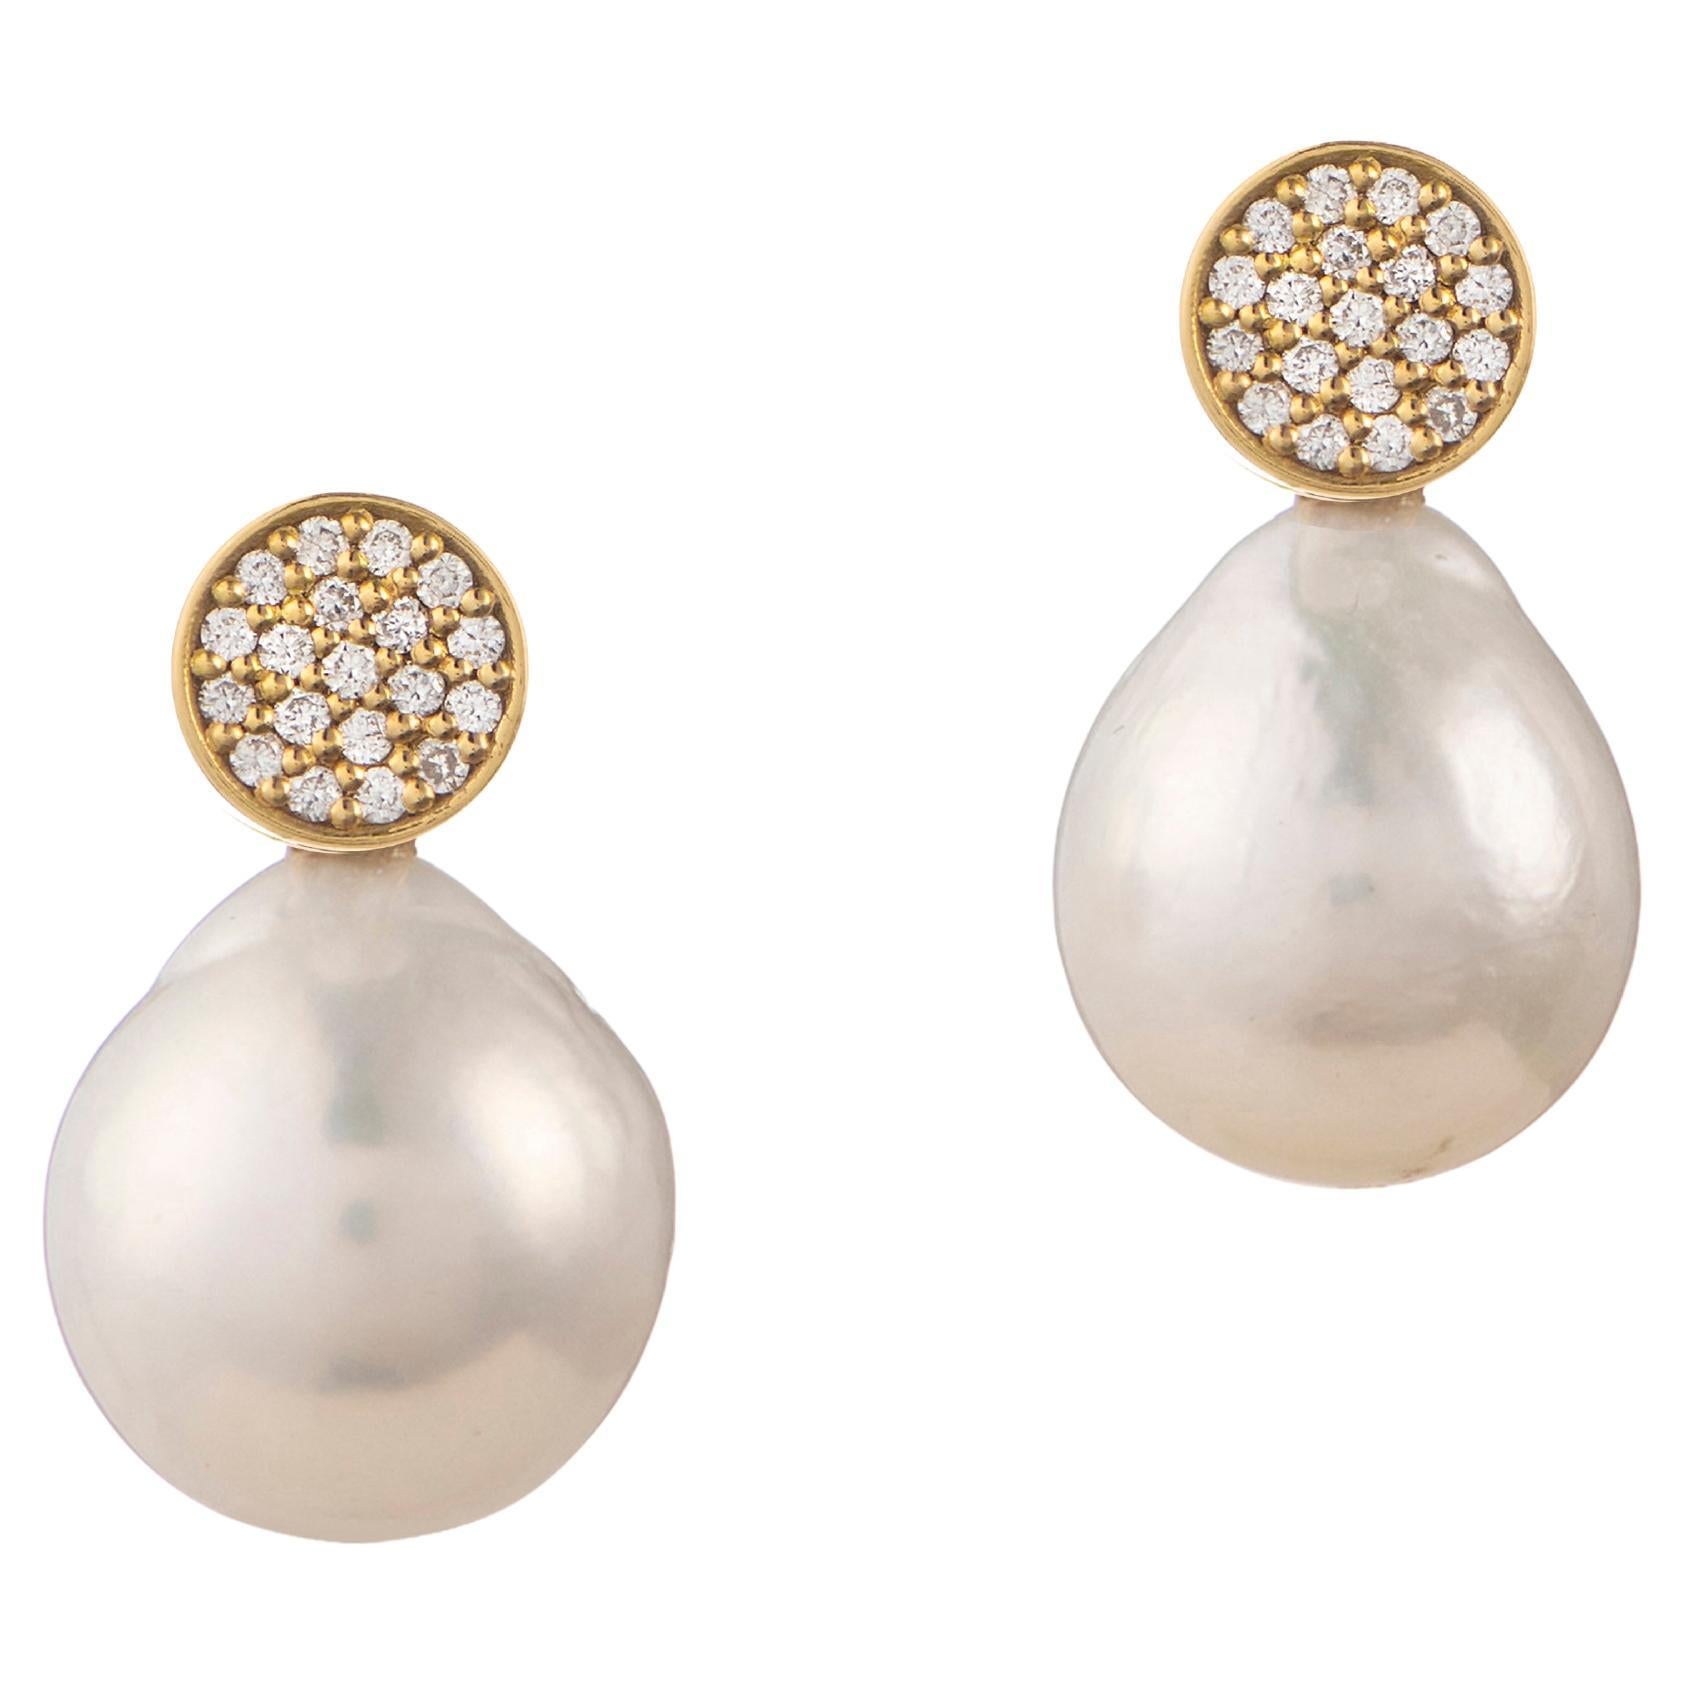 Diamond MICROPAVE earrings 0.20CTS with Detachable Baroque Pearls, 18K Gold